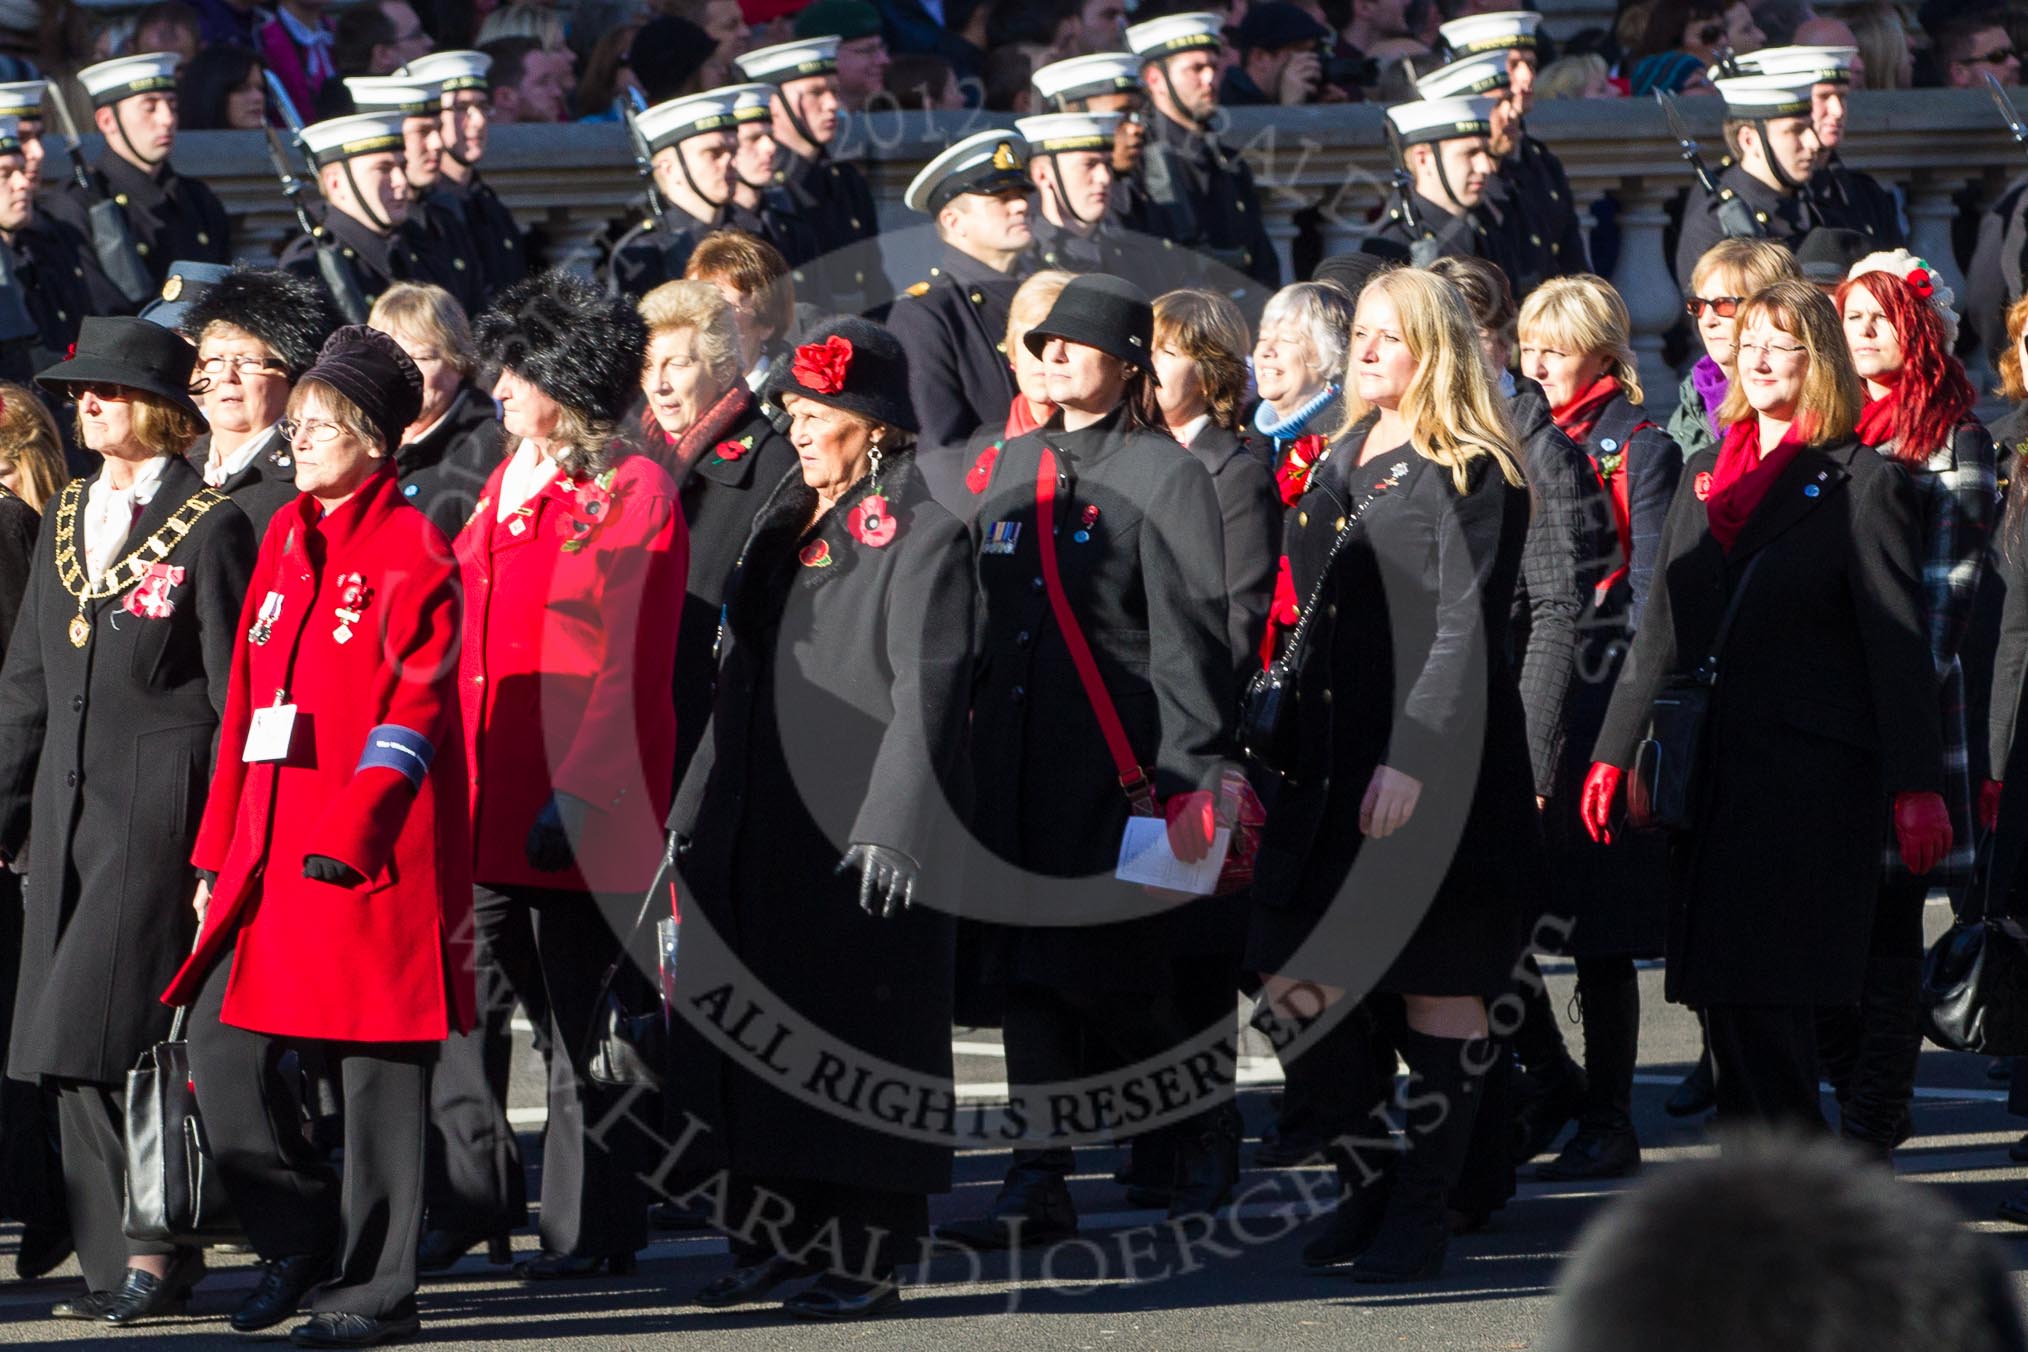 Remembrance Sunday 2012 Cenotaph March Past: Group D6 - War Widows Association..
Whitehall, Cenotaph,
London SW1,

United Kingdom,
on 11 November 2012 at 12:05, image #1260